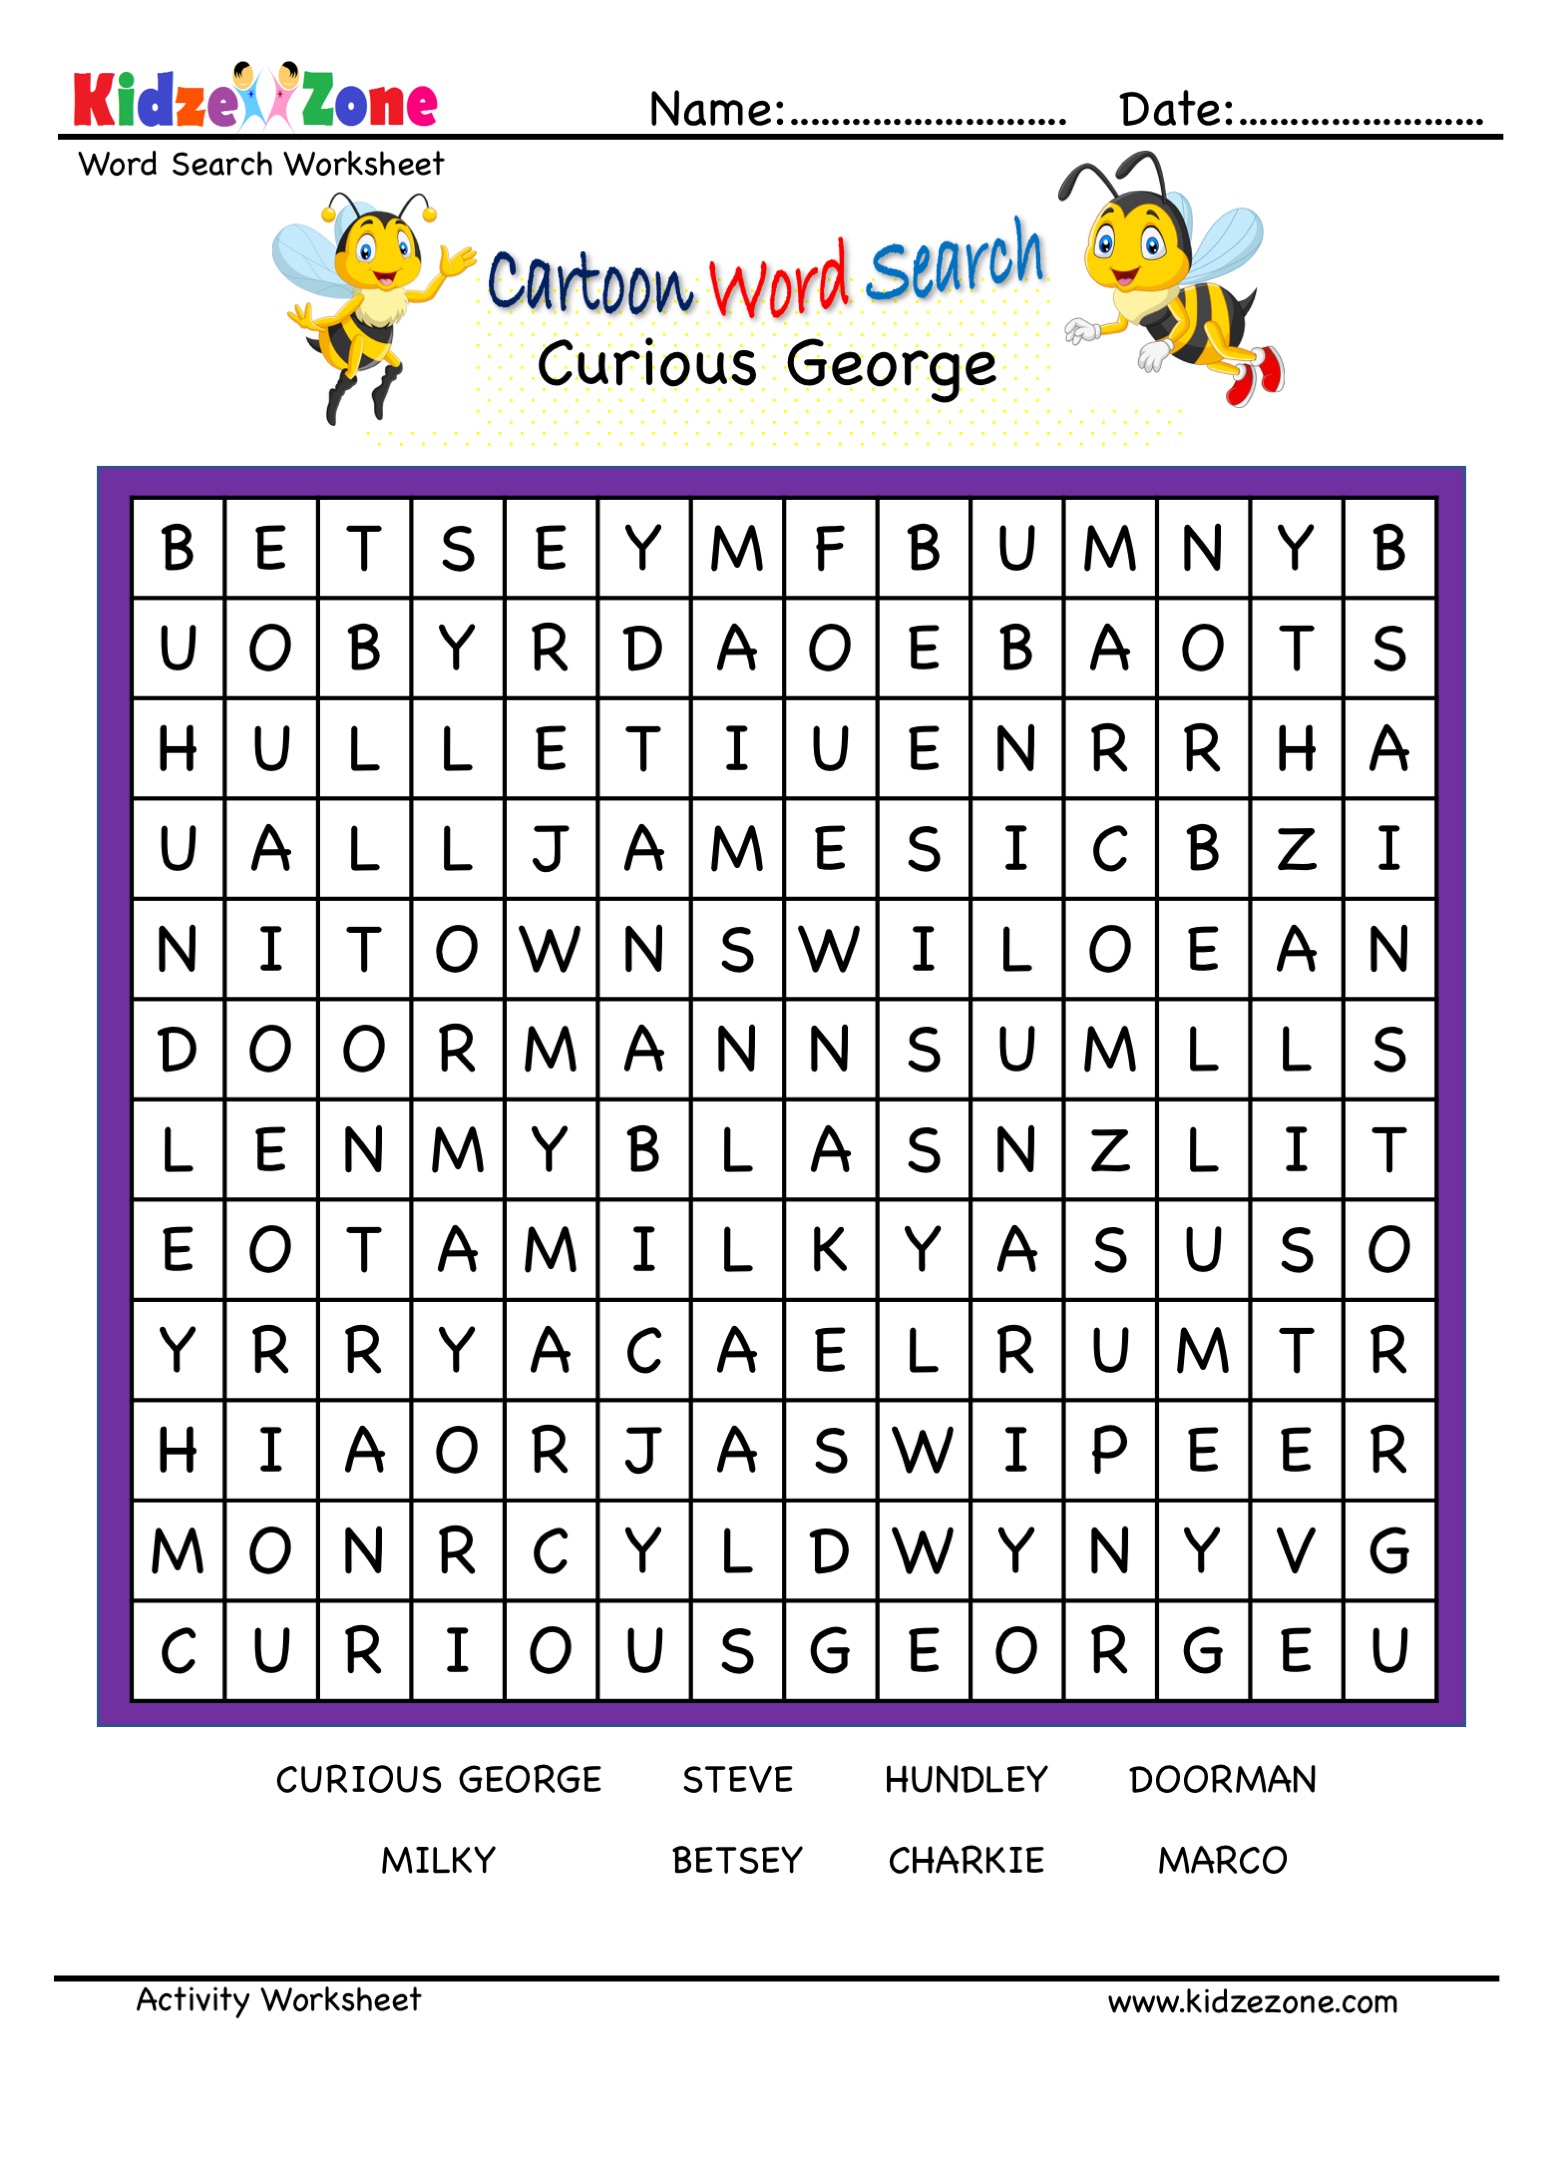 curious-george-word-search-puzzle-kidzezone